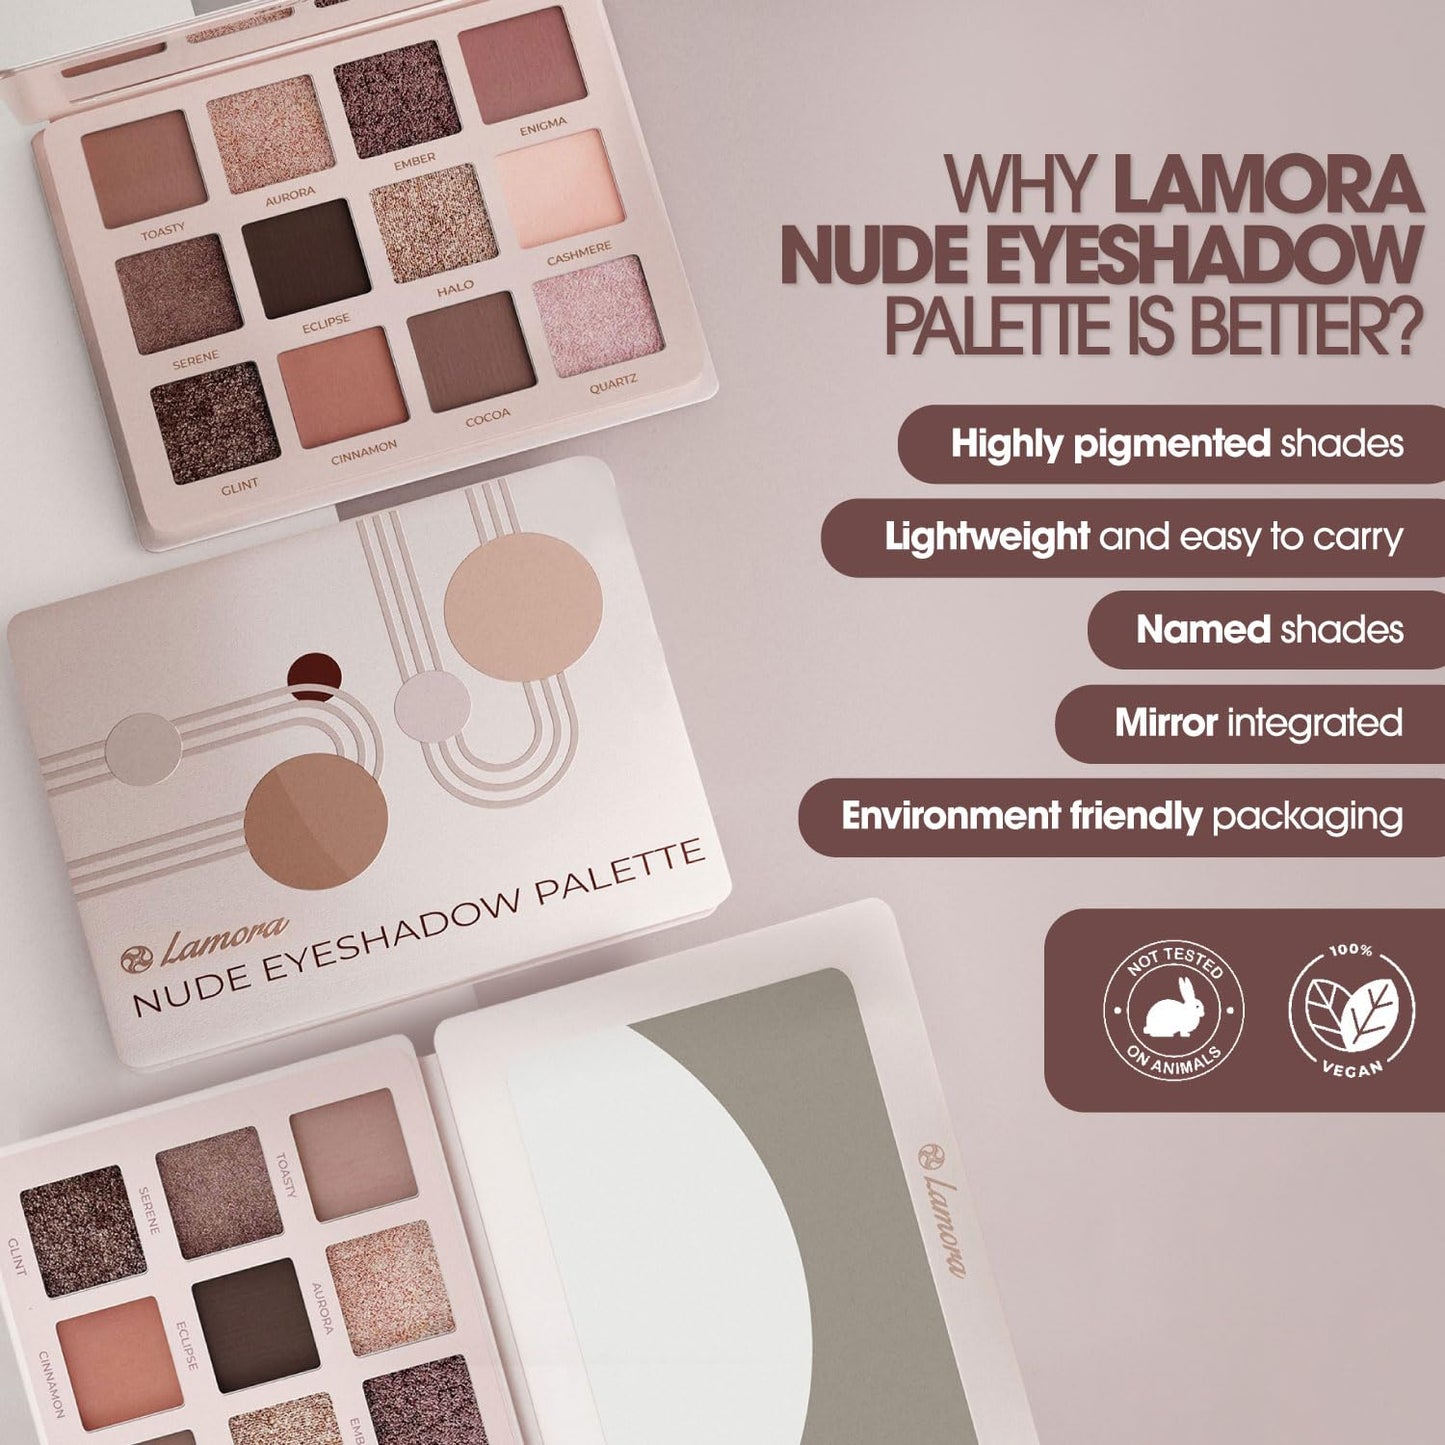 Lamora Nude Eyeshadow Palette Makeup - 12 Neutral Pigmented Matte & Shimmer Shades - Travel Size Eye Shadow With Mirror